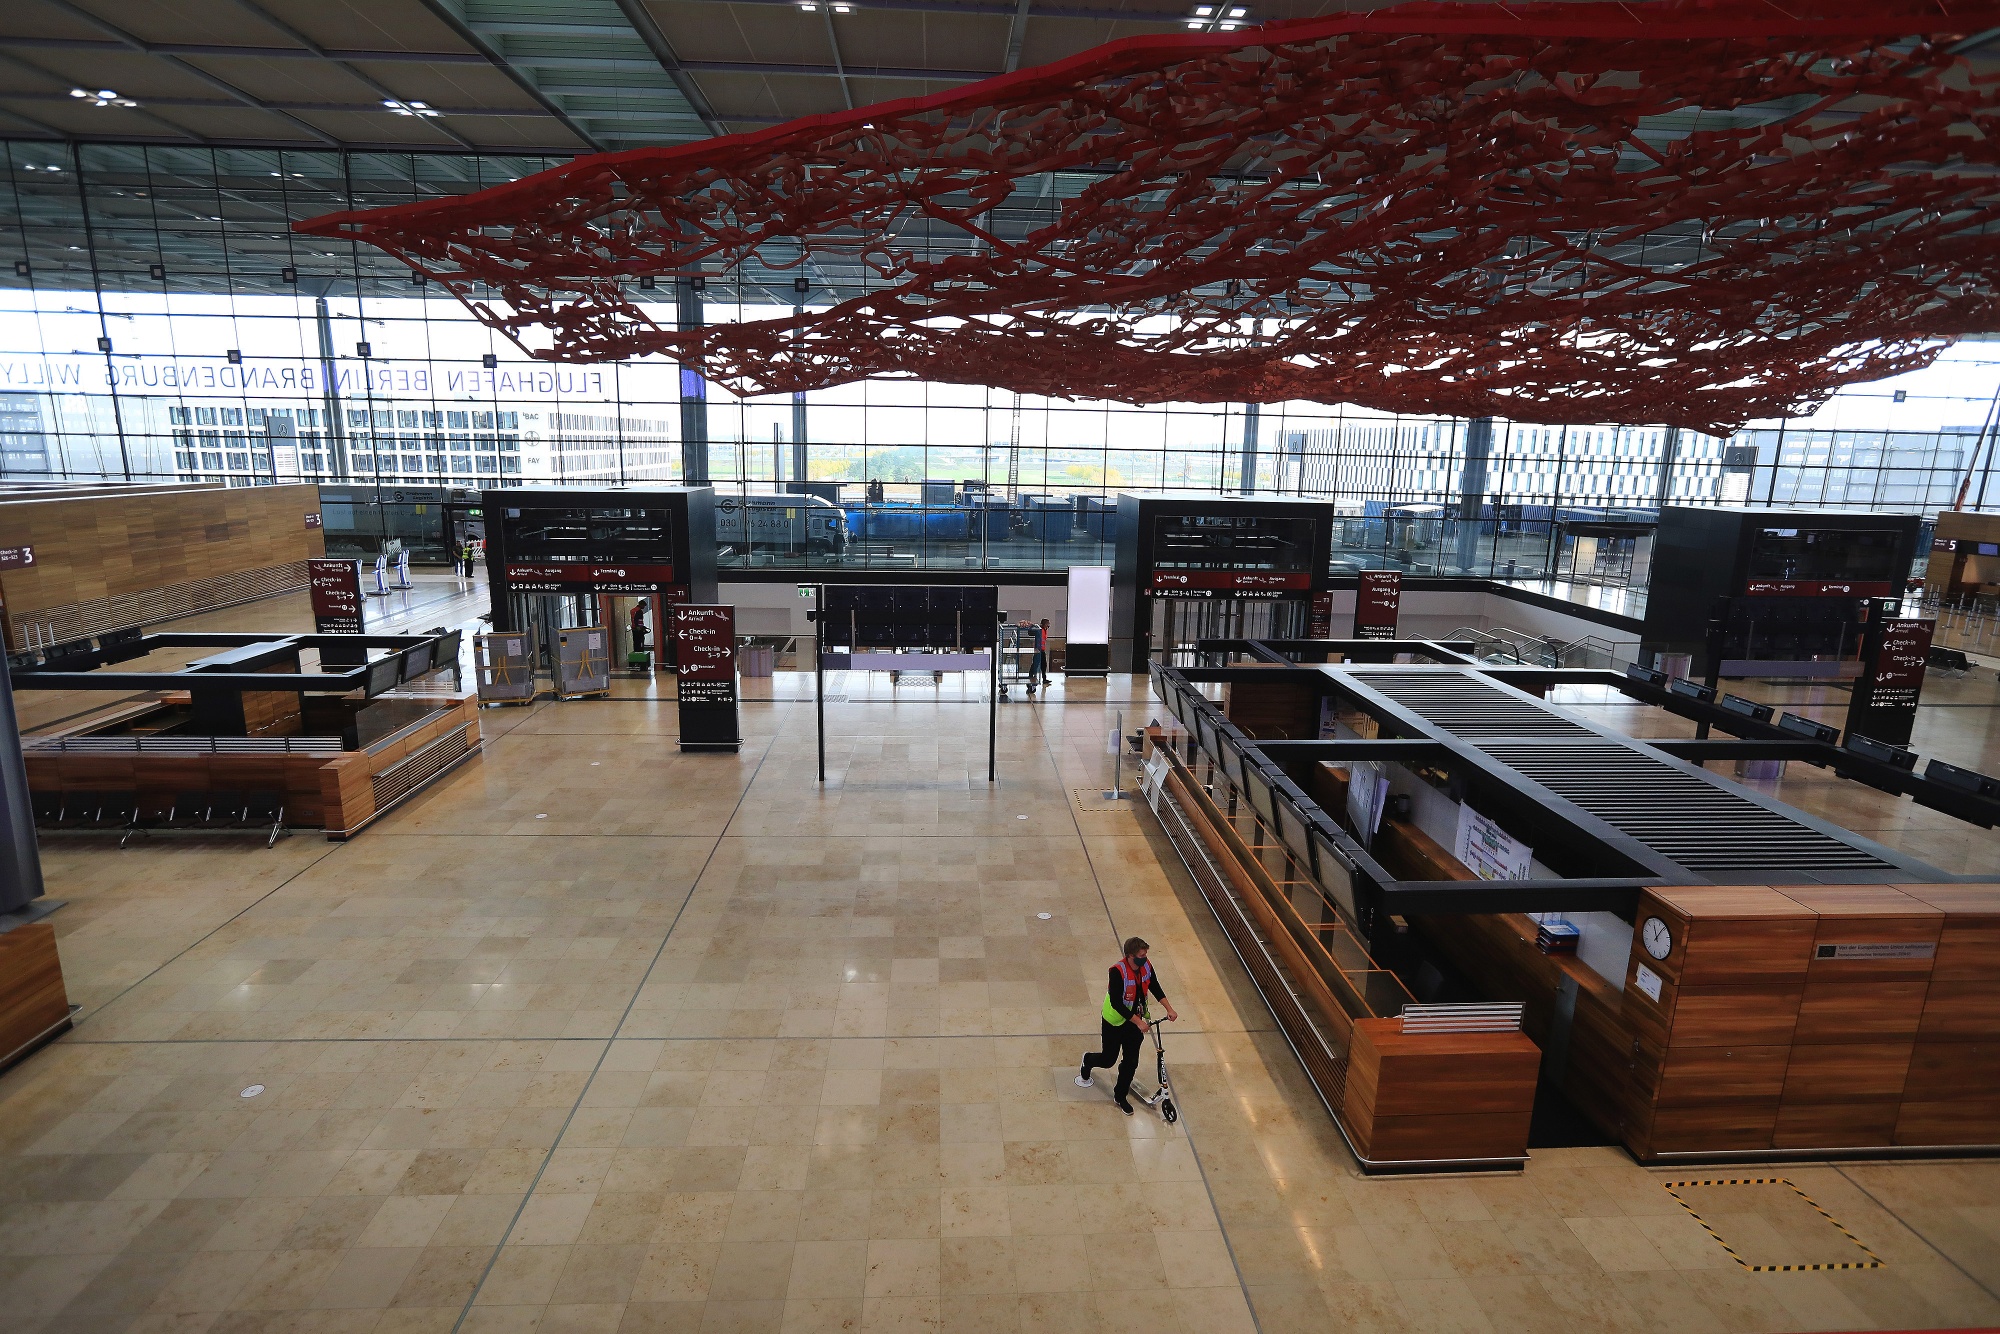 Berlin Brandenburg’s main terminal includes a giant red carpet artwork hanging from the ceiling.